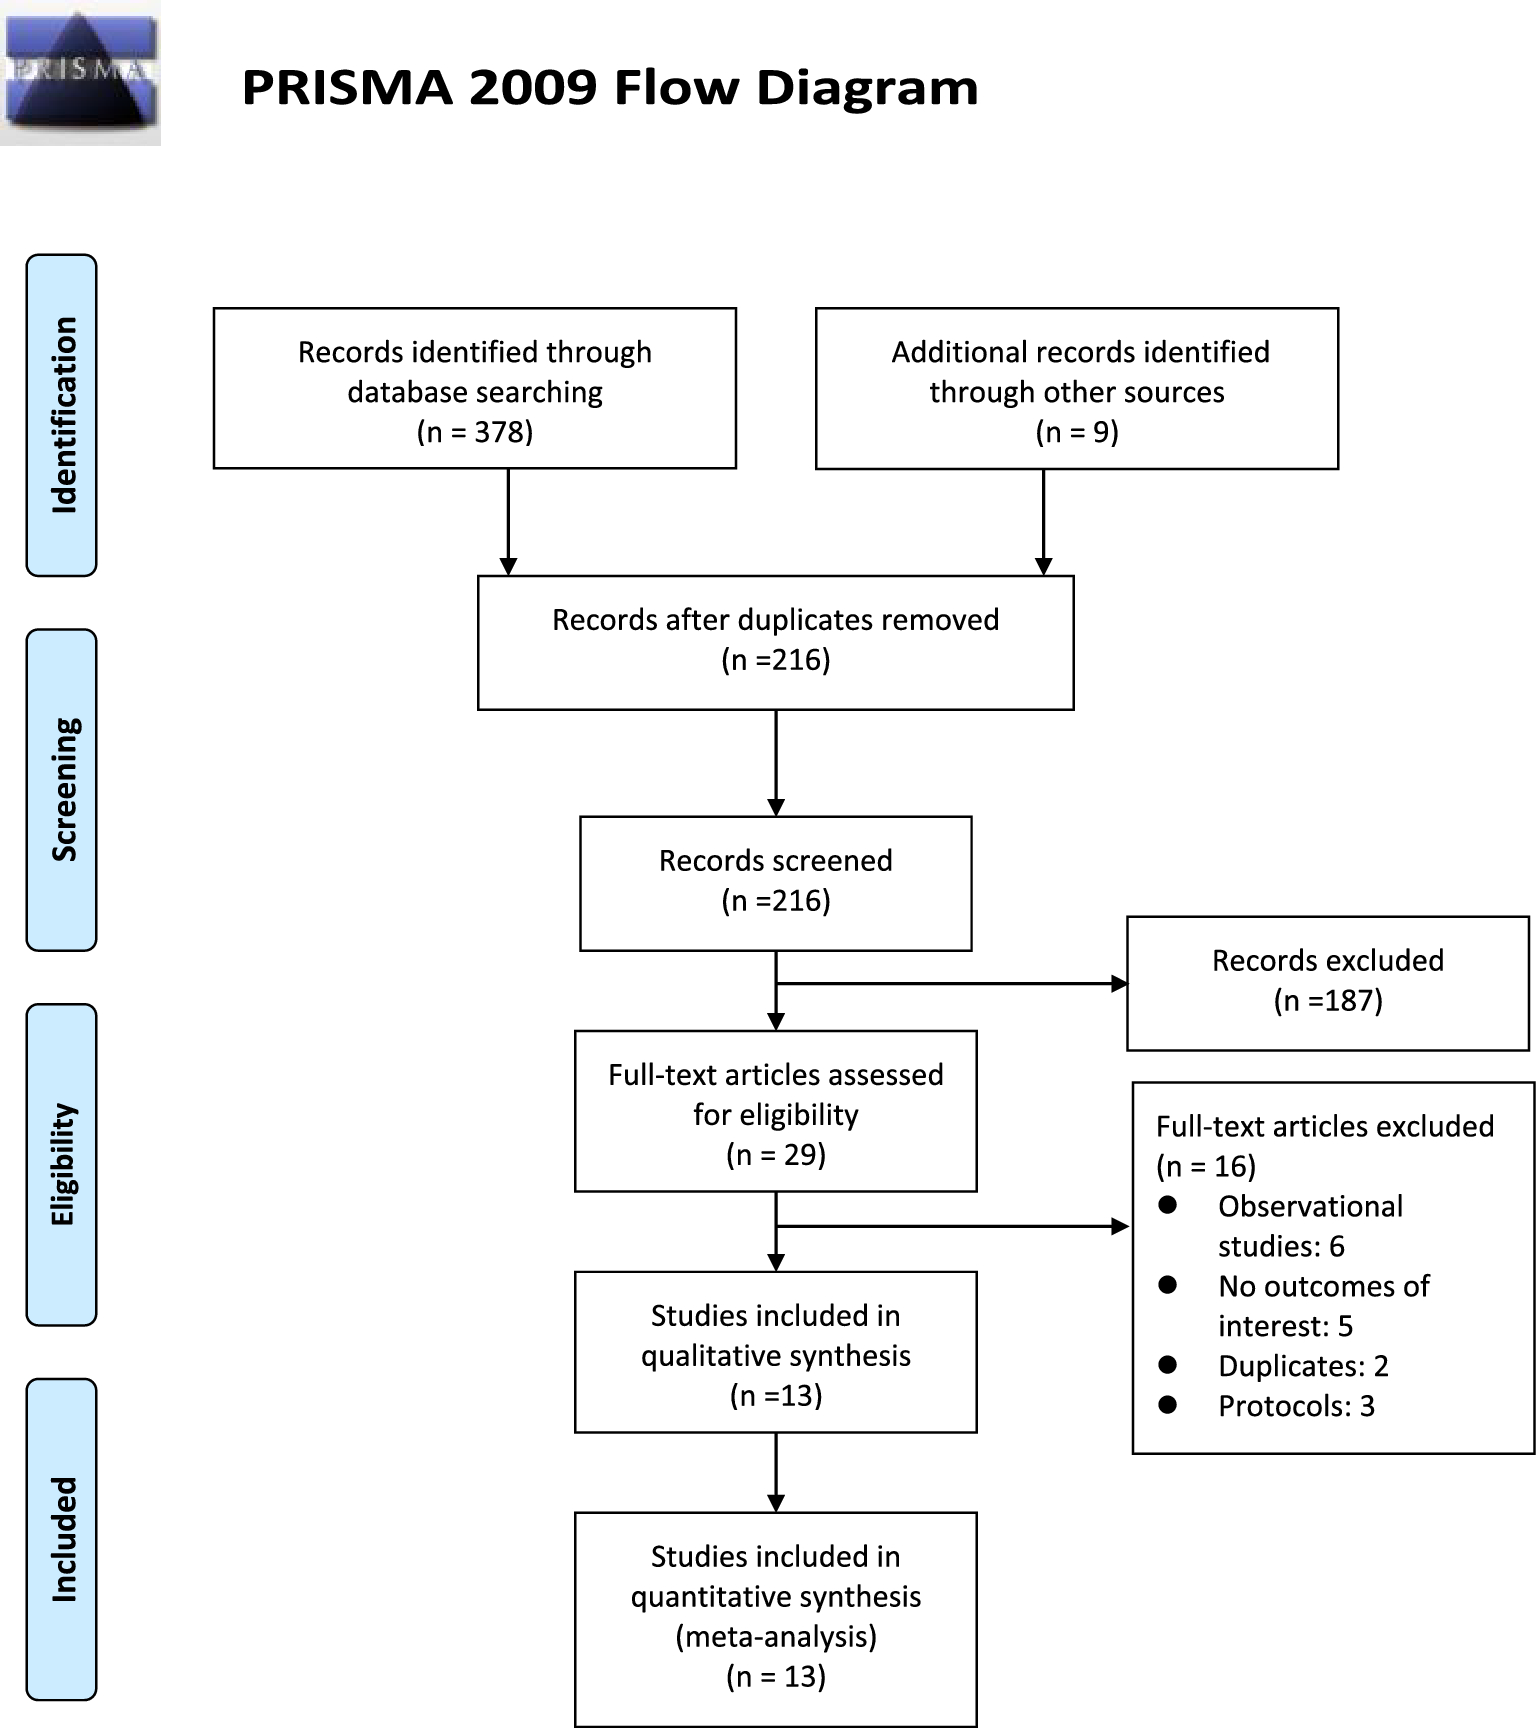 Effect of Statin Treatment in Patients with Aneurysmal Subarachnoid Hemorrhage: A Network Meta-Analysis